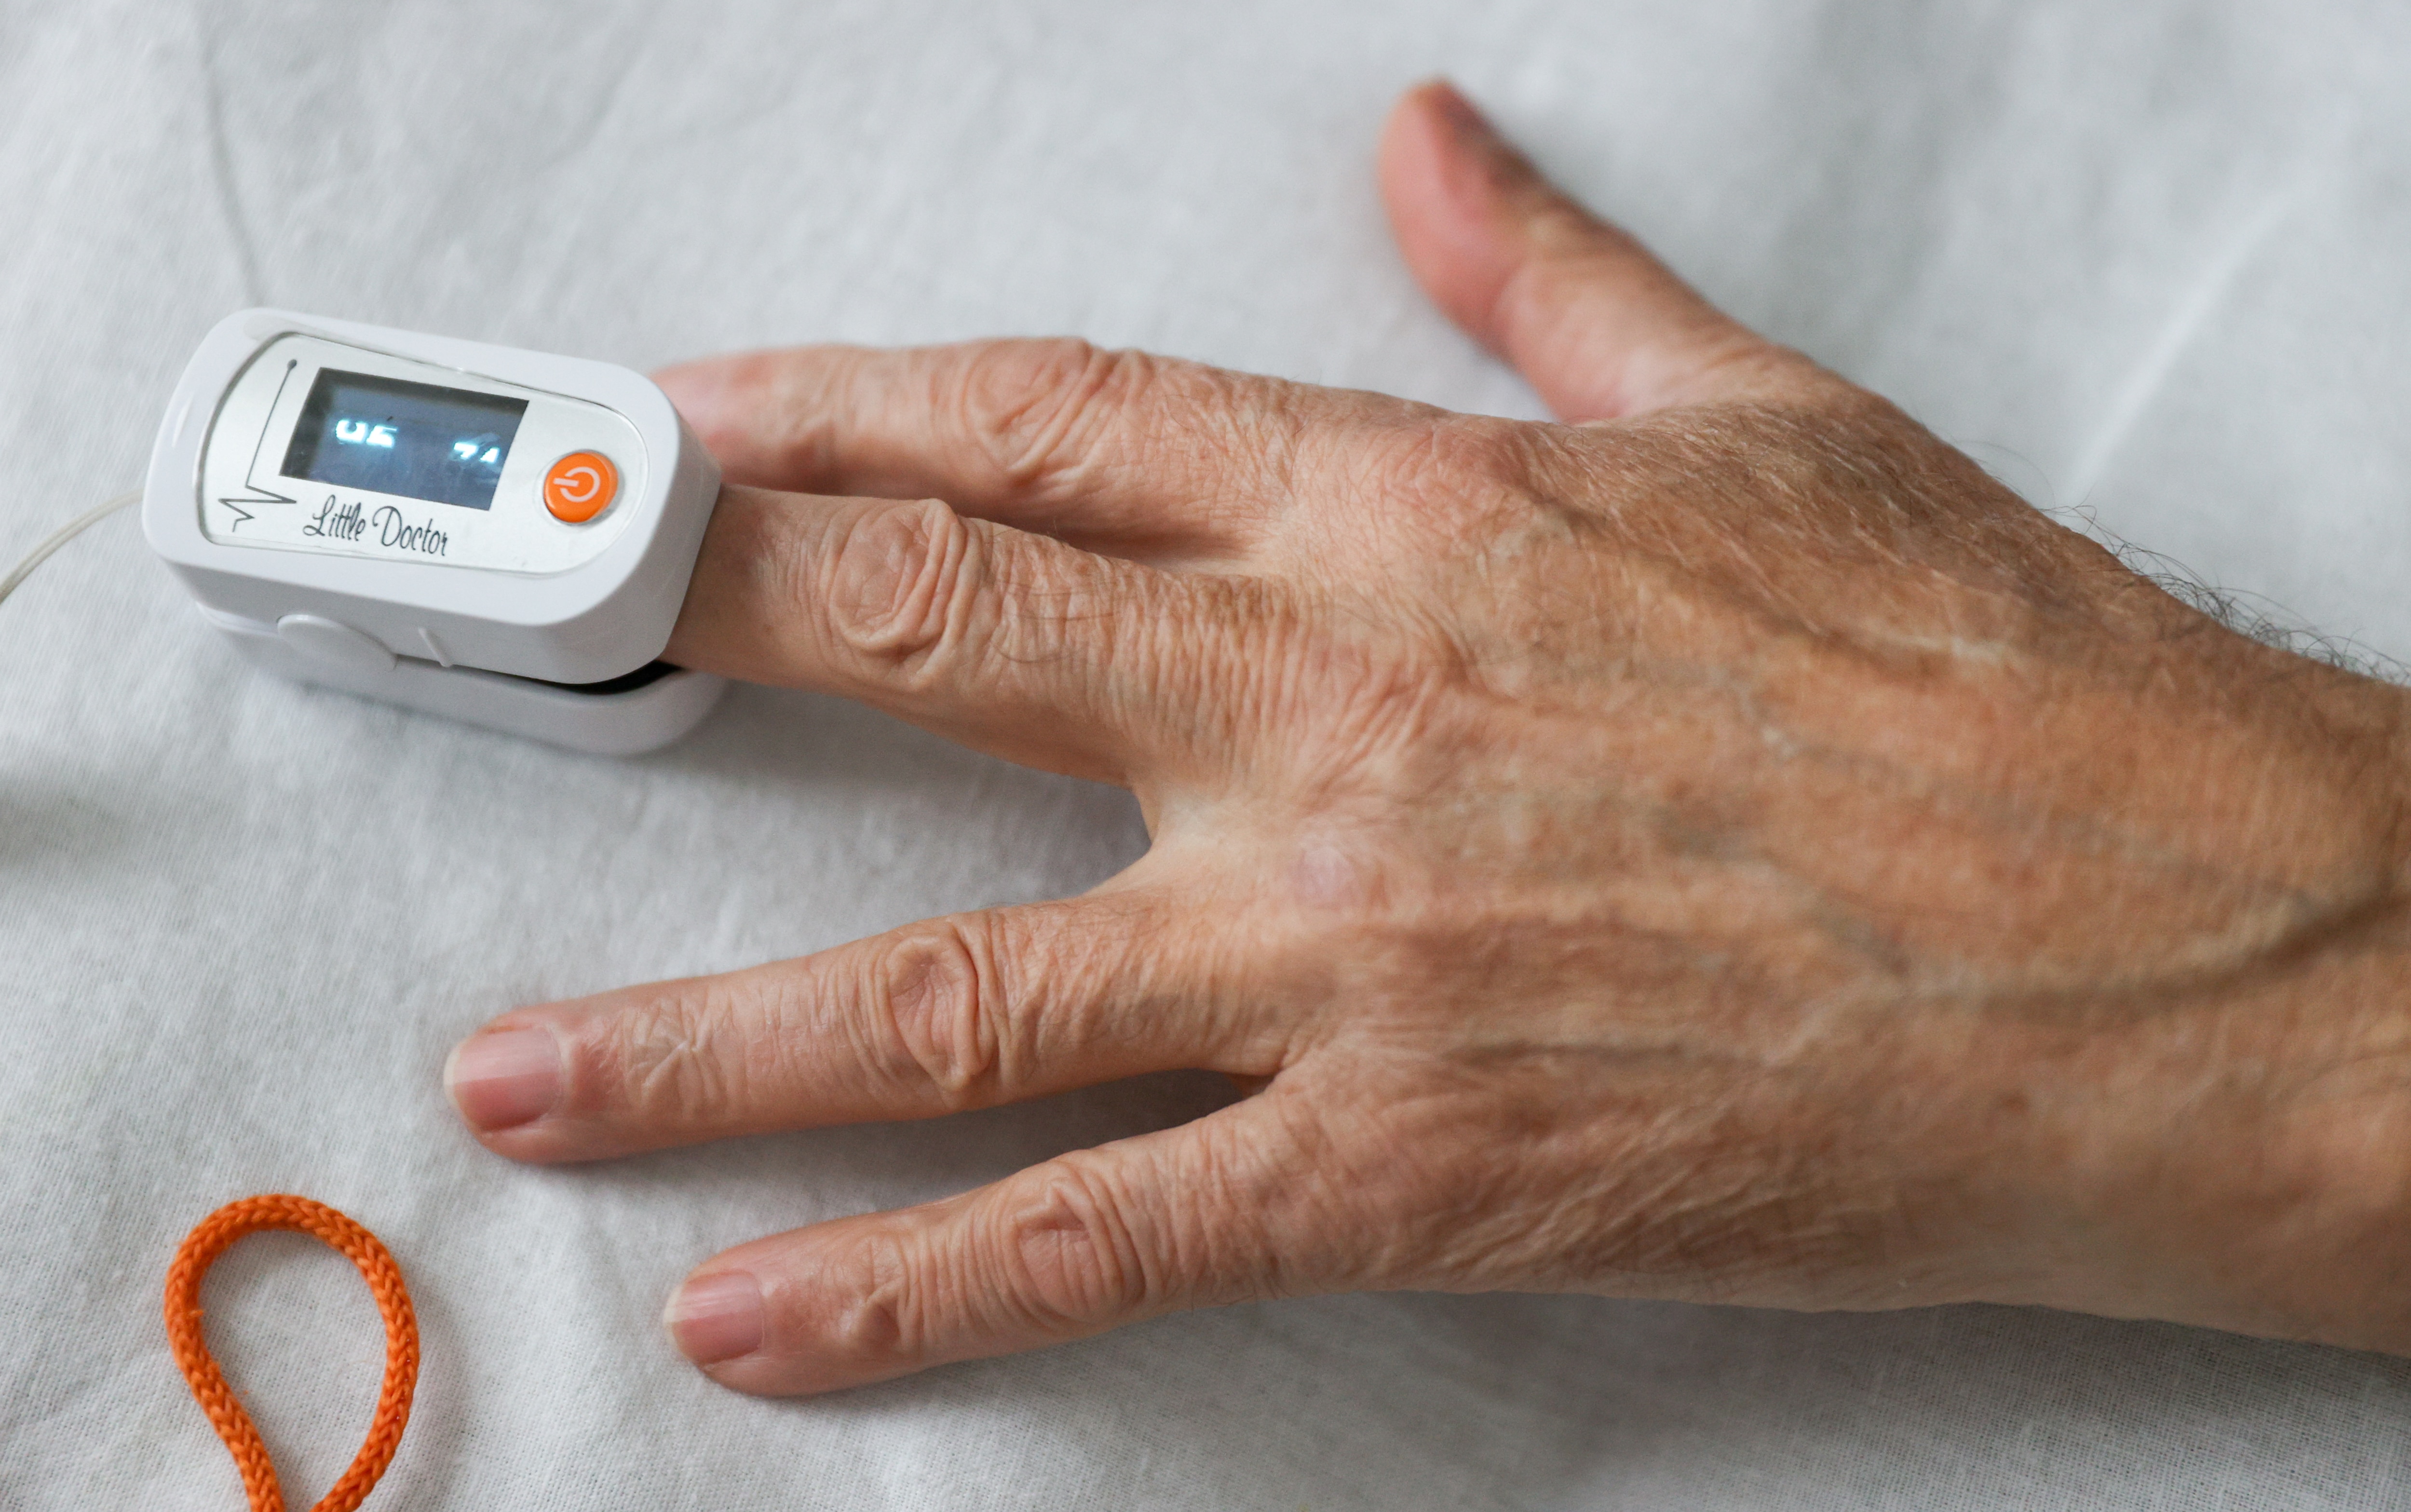 A hospital patient with a pulse oximeter on their finger.